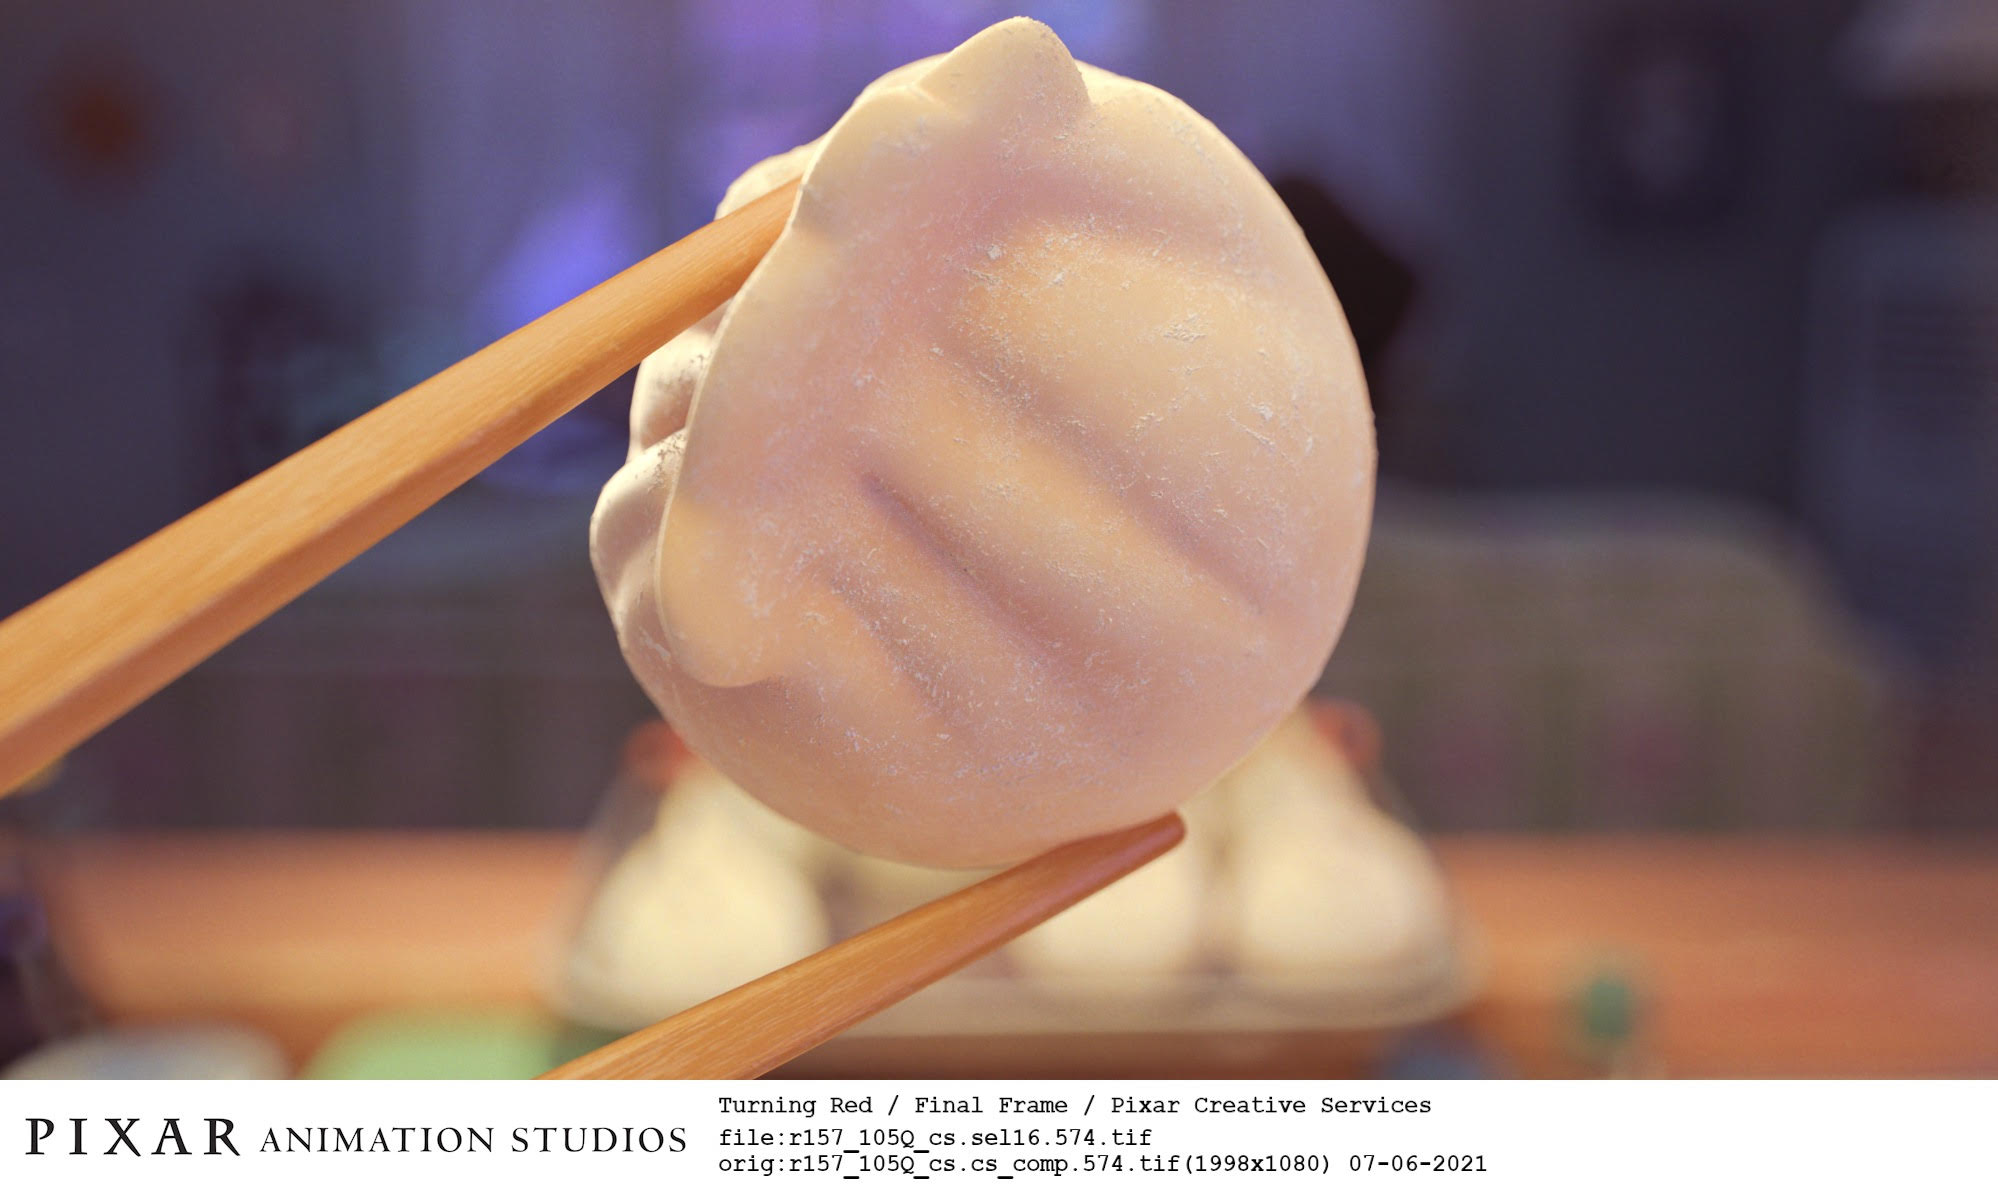 A shot from the film Turning Red of an uncooked bao held between chopsticks.